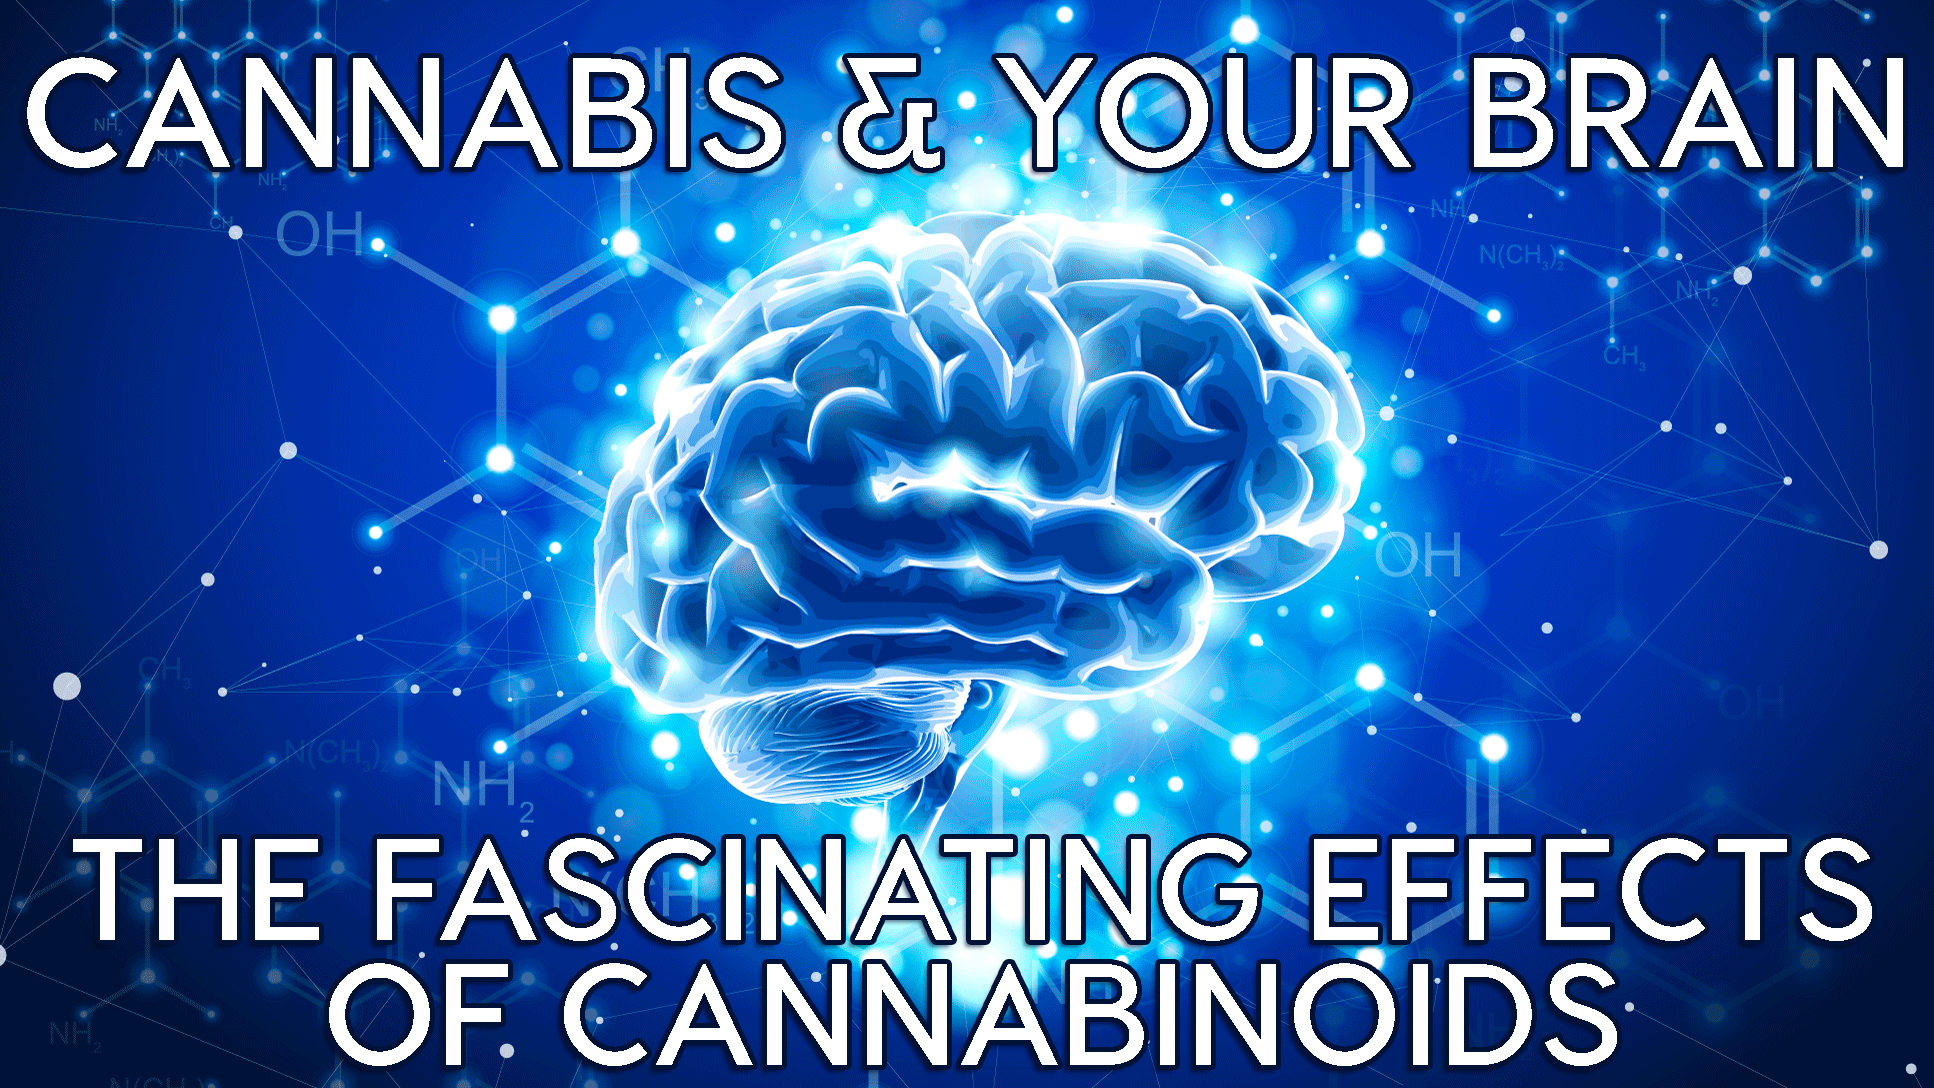 An examination of the effects of cannabis on the brain.